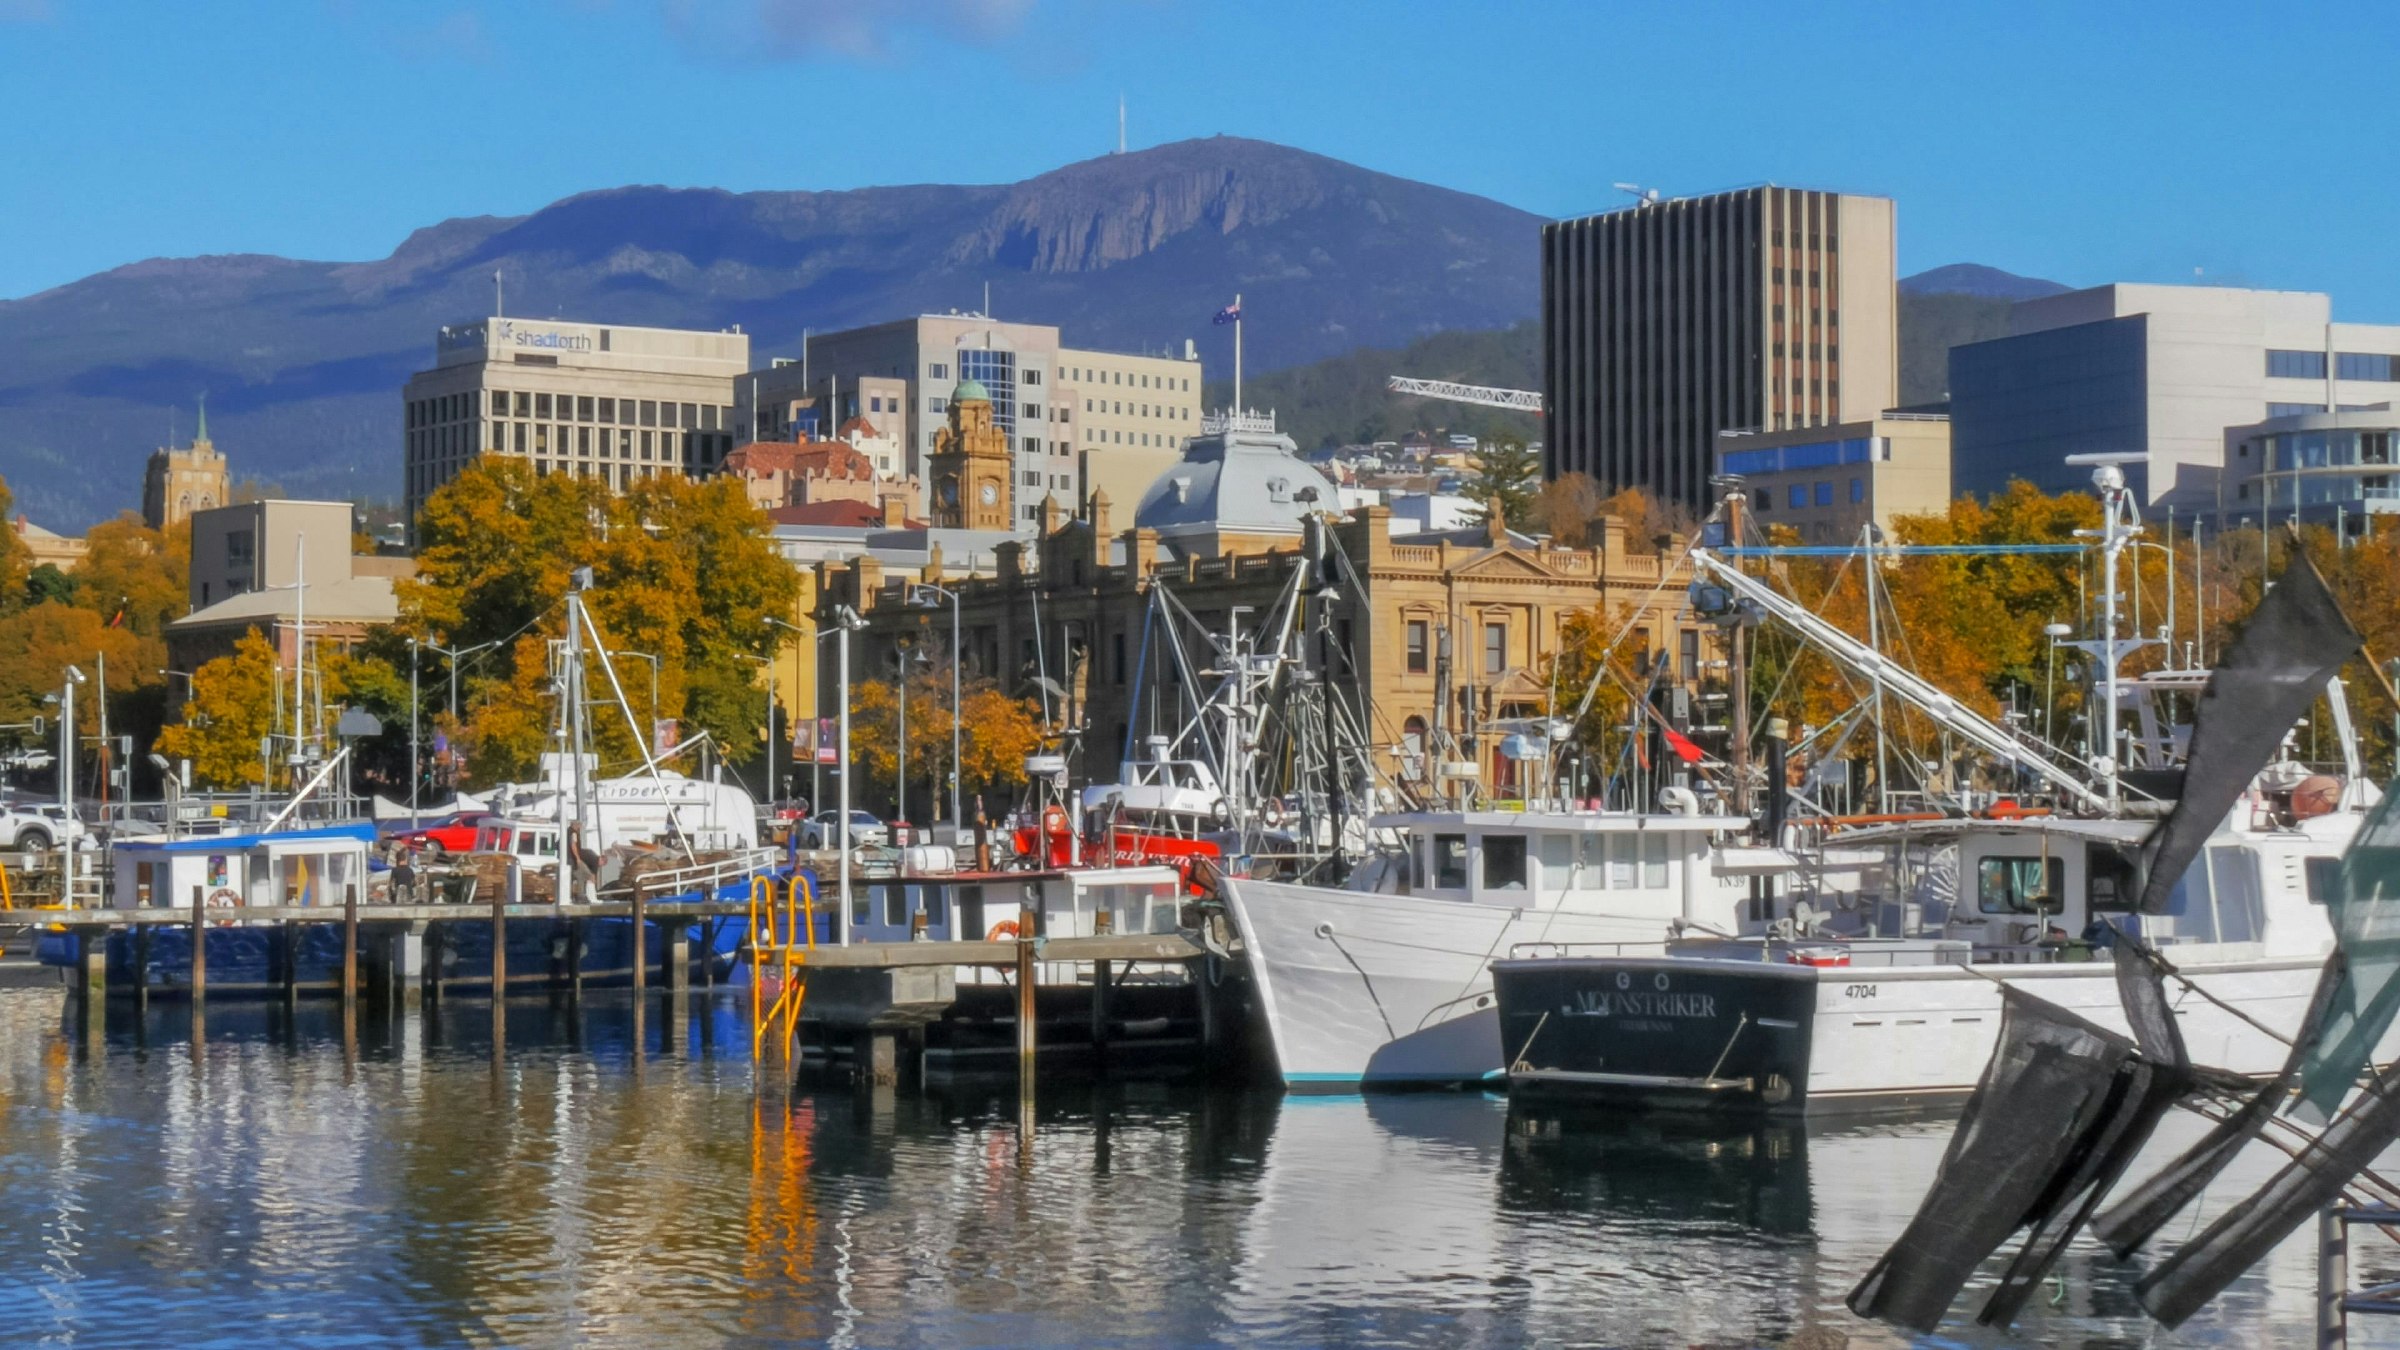 A close up view of fishing vessels at Victoria Dock in the Tasmanian capital city of Hobart